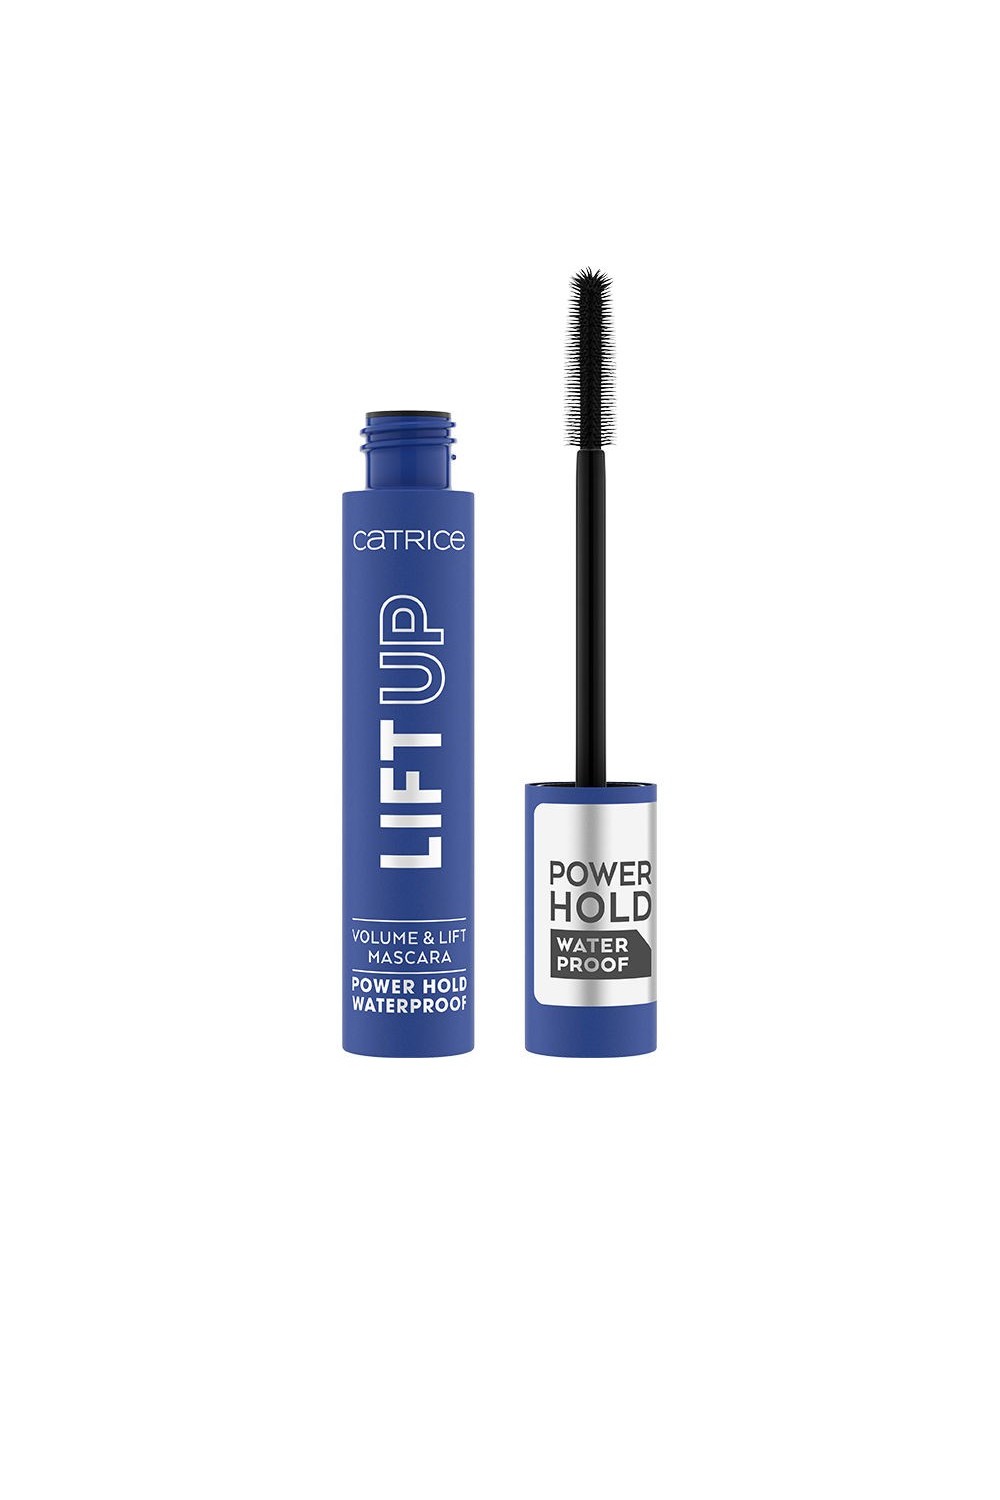 Catrice Lift Up Volume y Lift Mascara Power Hold Waterproof 010 11ml